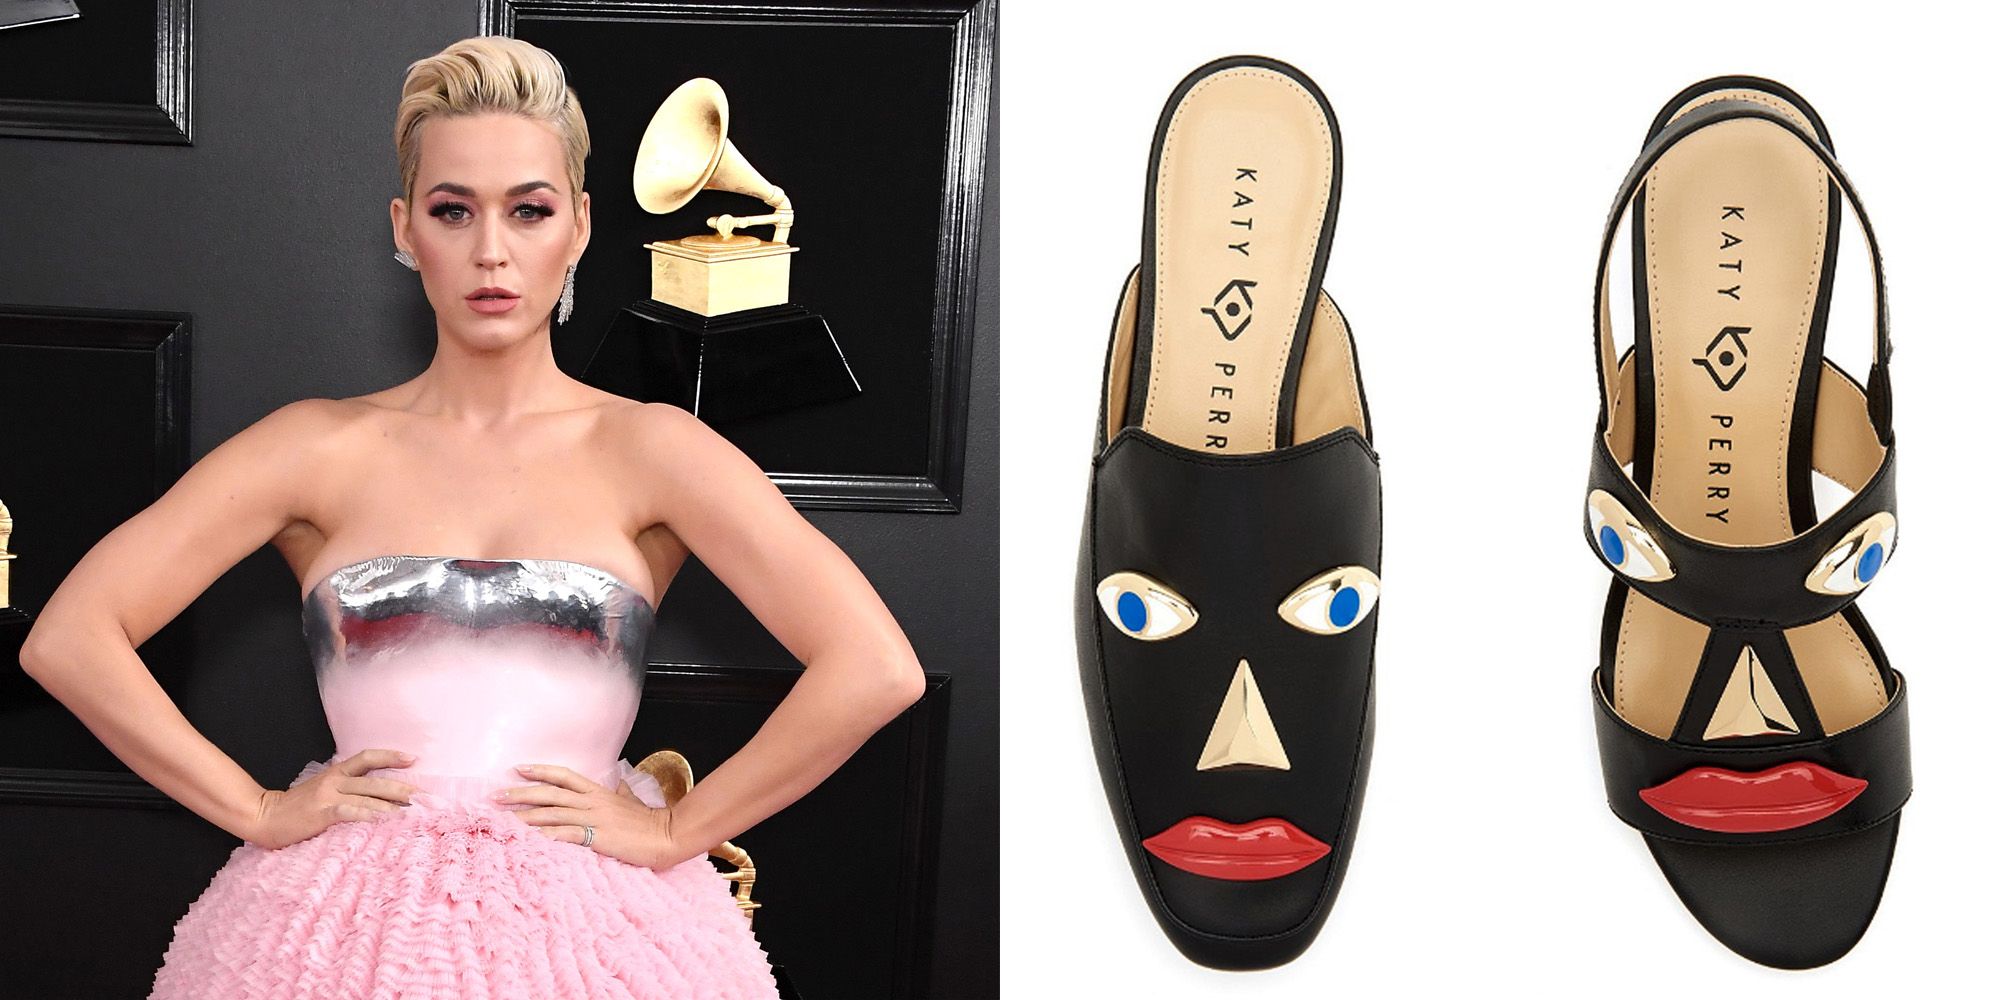 Katy Perry Shoe Line Receives Backlash For Designs Resembling Blackface